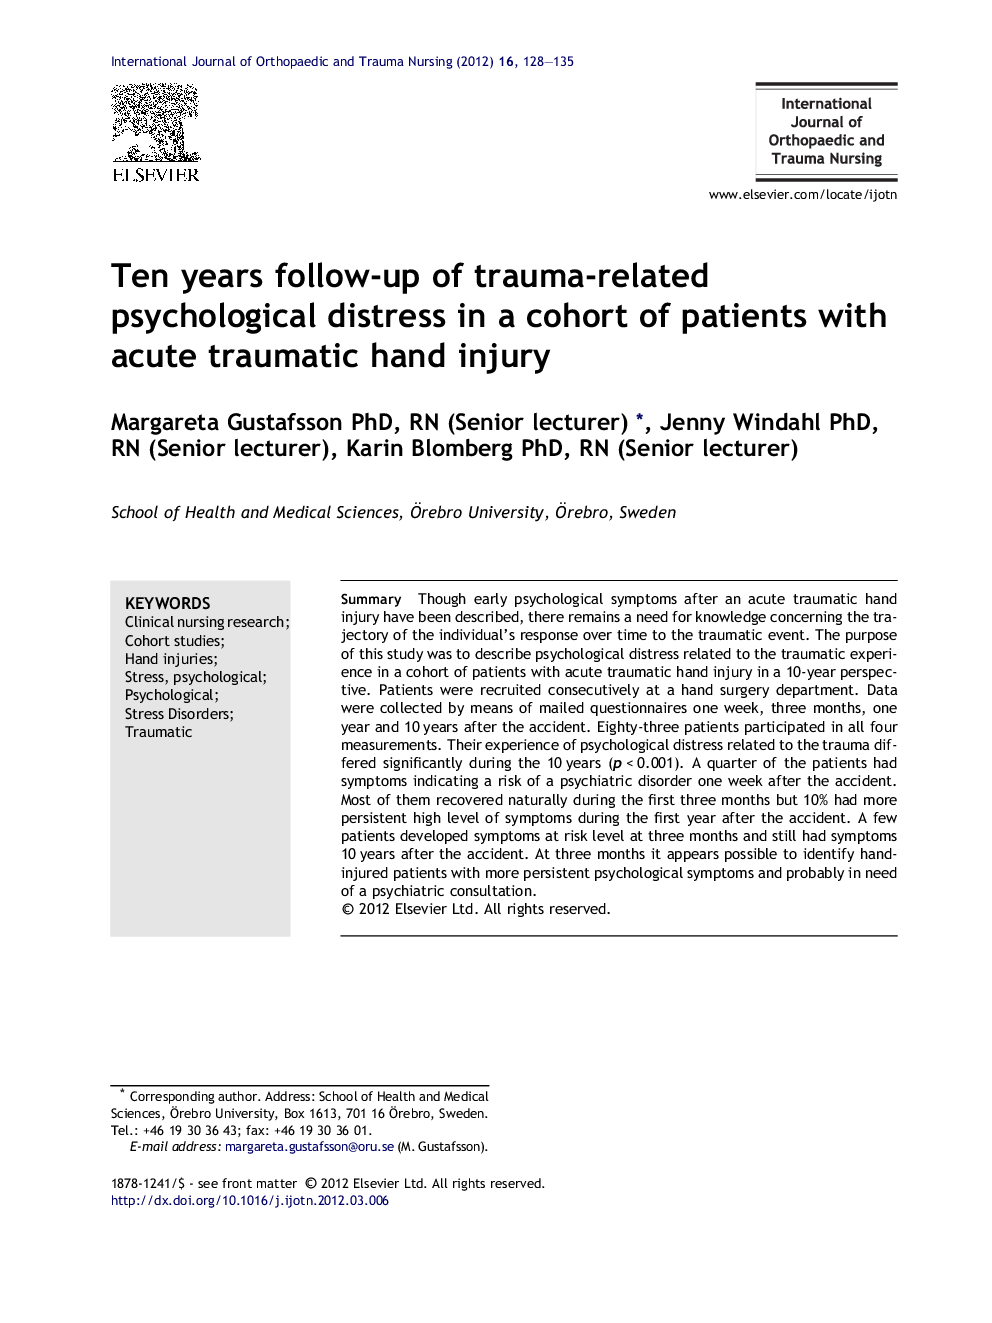 Ten years follow-up of trauma-related psychological distress in a cohort of patients with acute traumatic hand injury